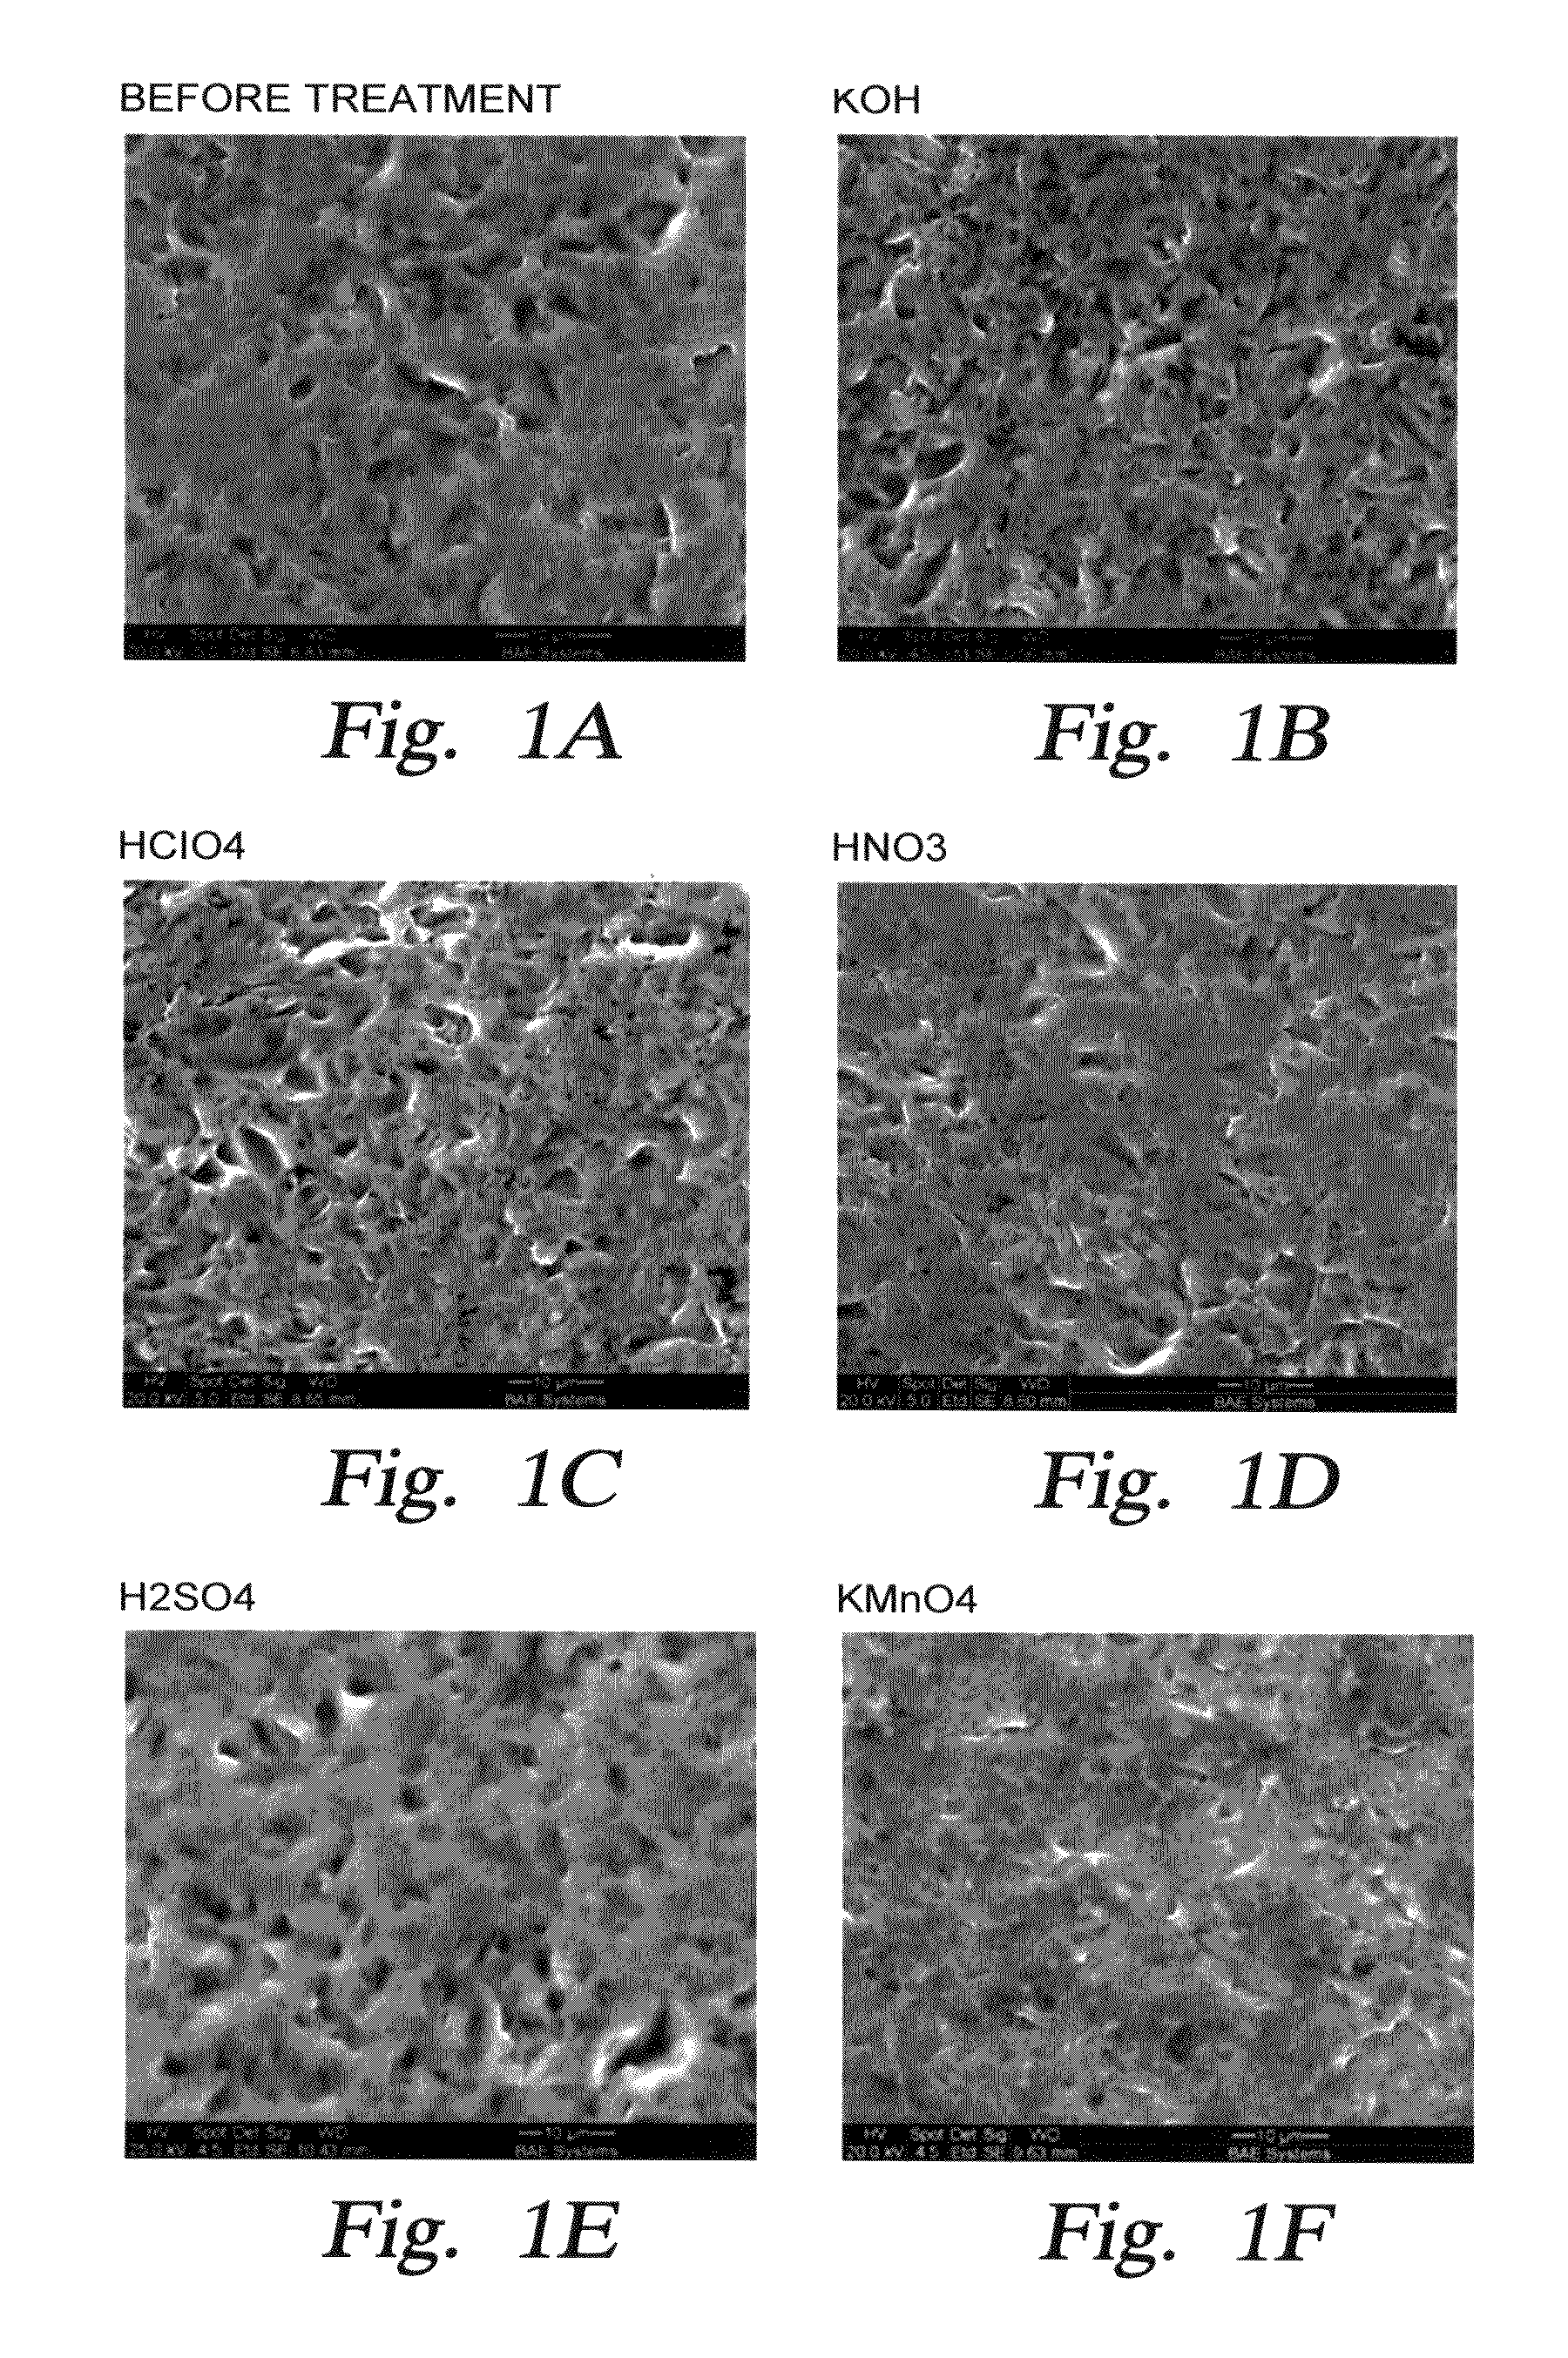 Chemical treatment to reduce machining-induced sub-surface damage in semiconductor processing components comprising silicon carbide